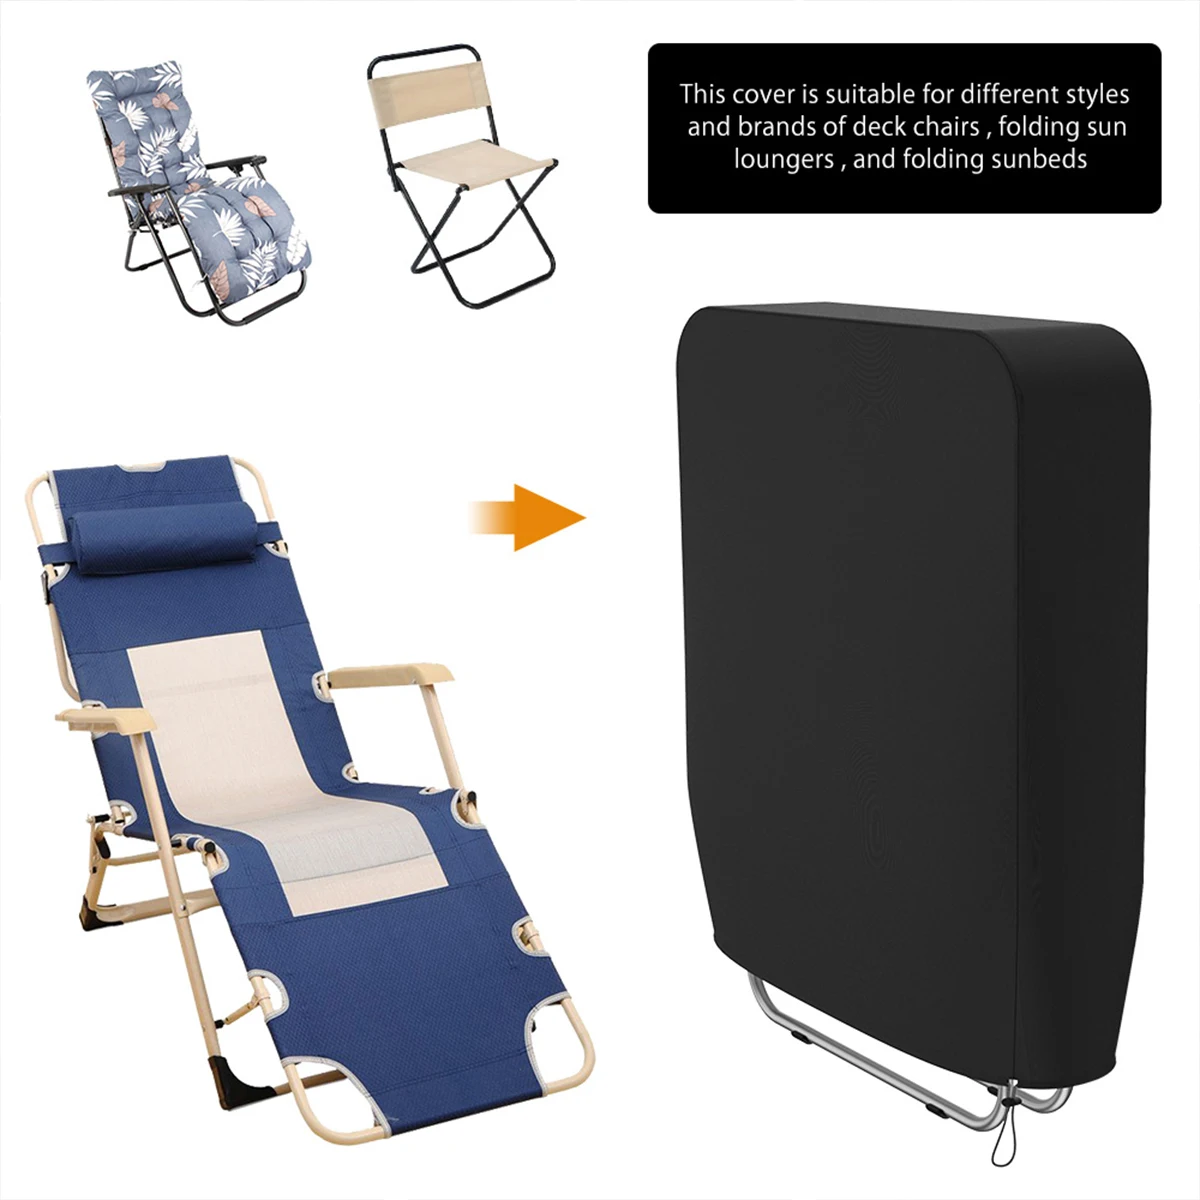 Folding Chairs Cover Outdoor Dustproof UV Protection Waterproof Cover Reclining Chair Cover Black Furniture Case Storage Bag Hot